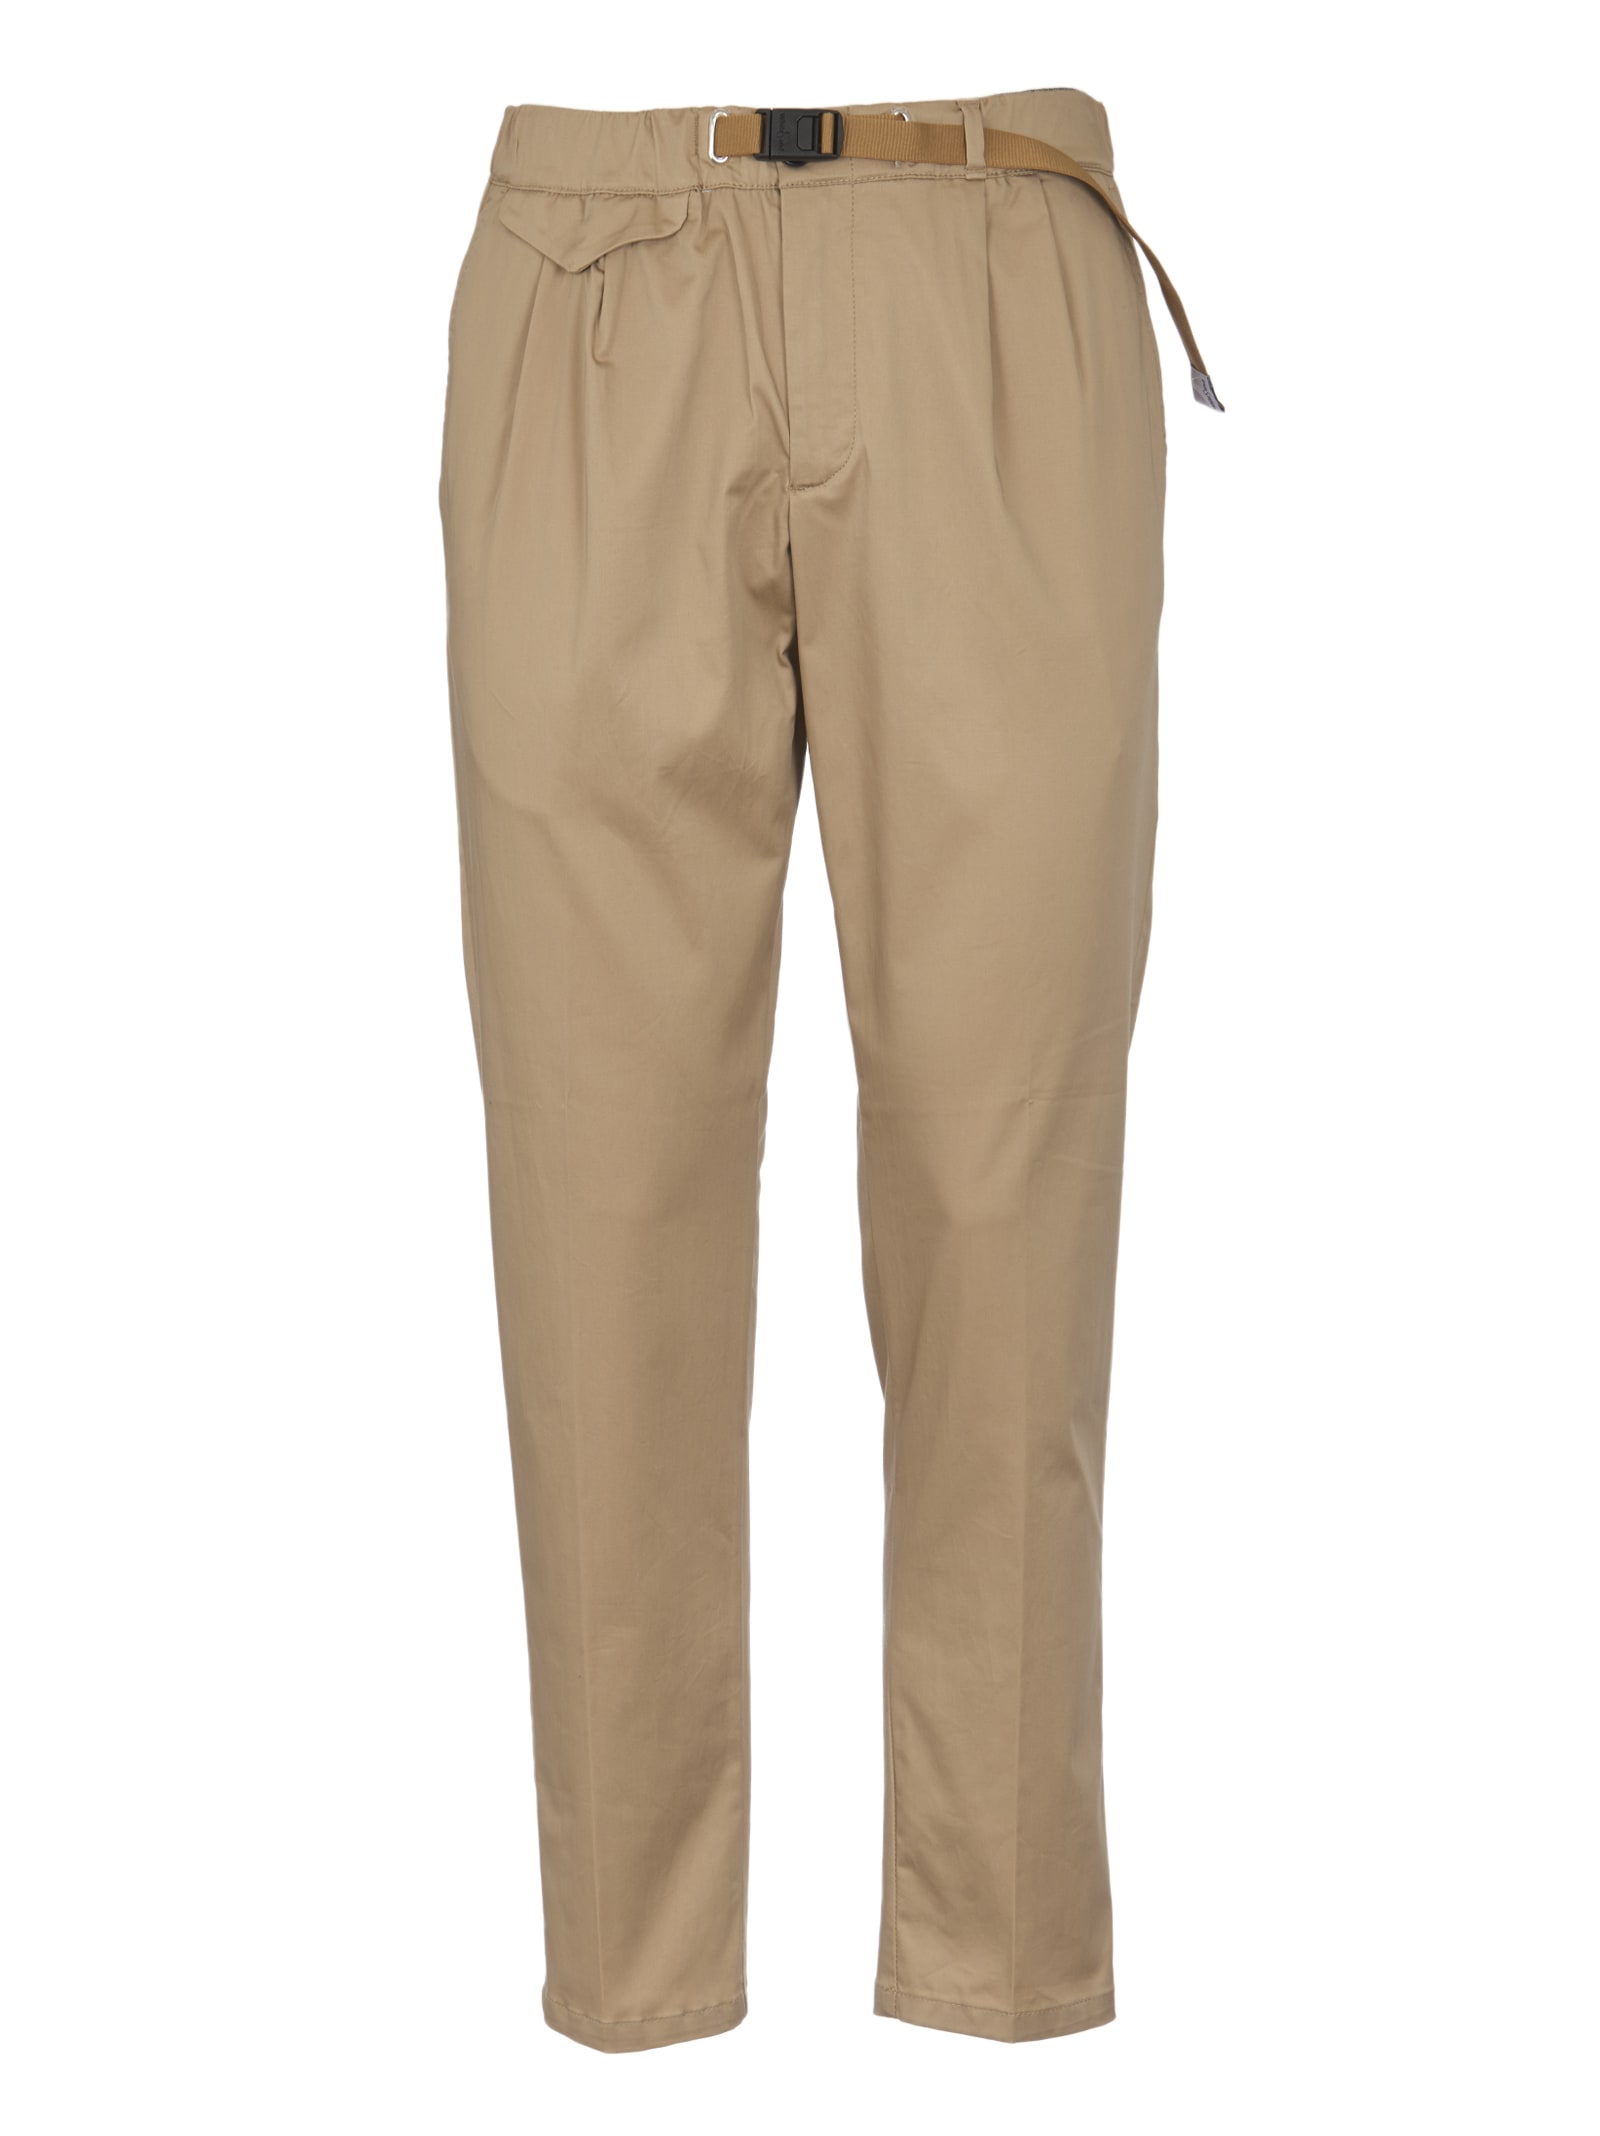 WhiteSand Belted Trousers